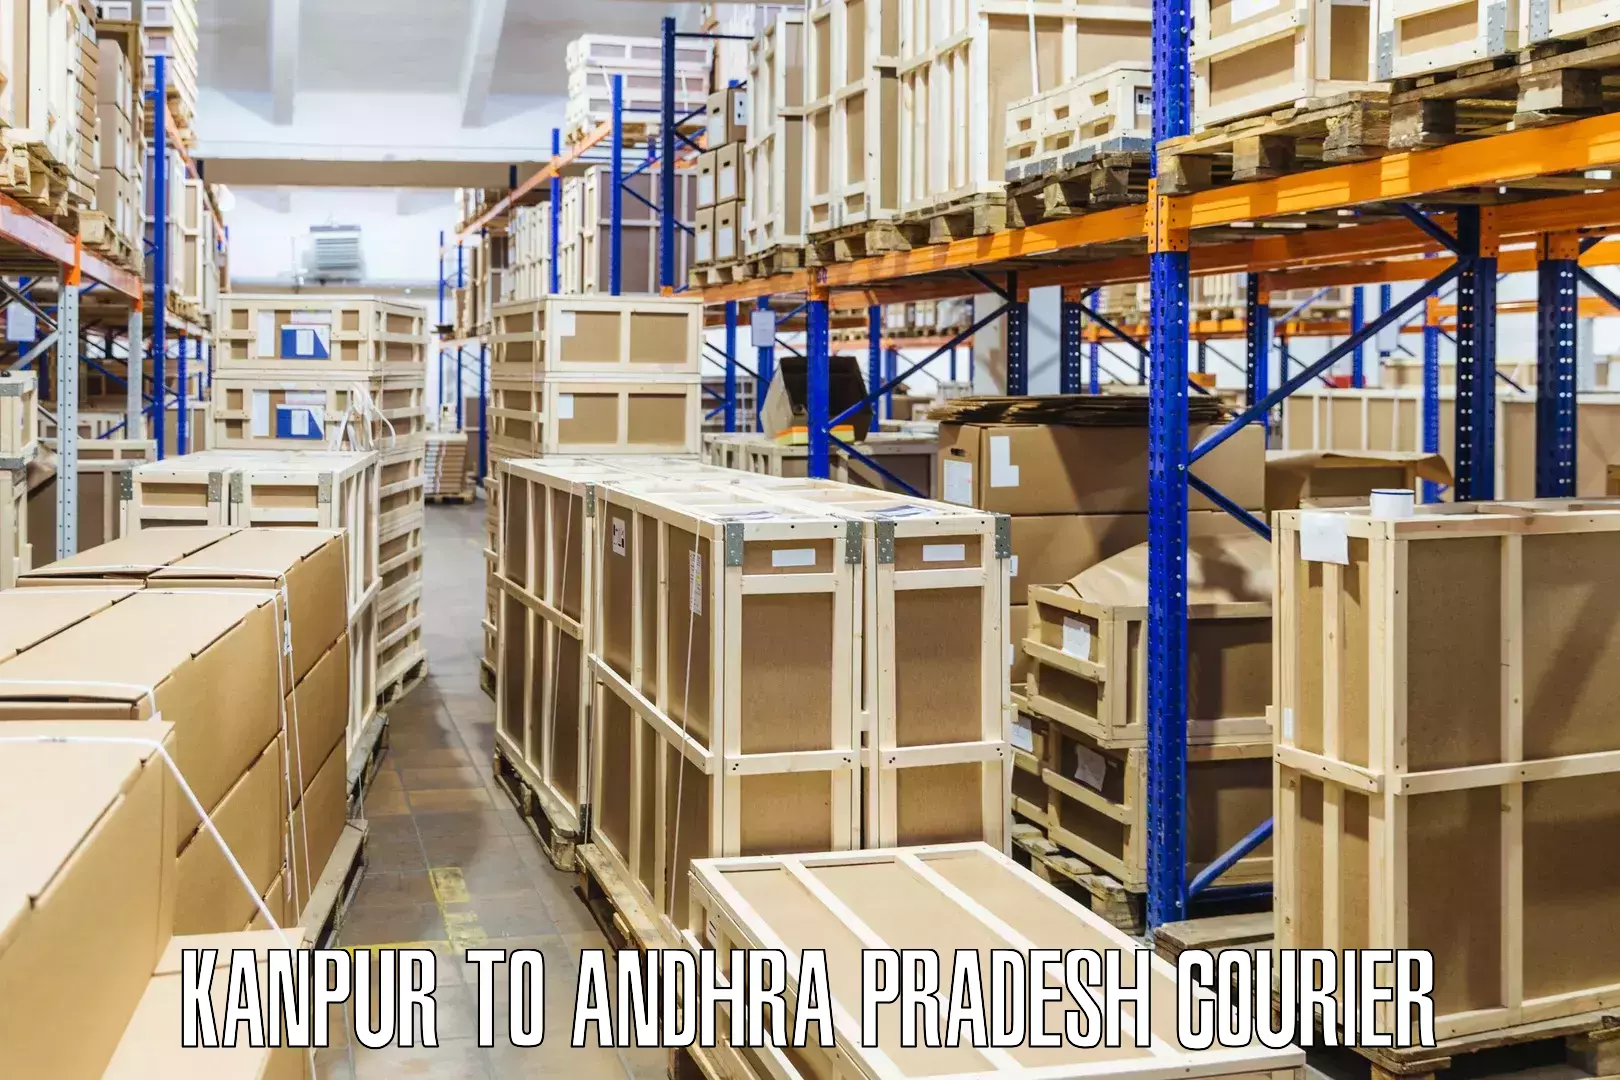 24-hour delivery options Kanpur to Andhra Pradesh